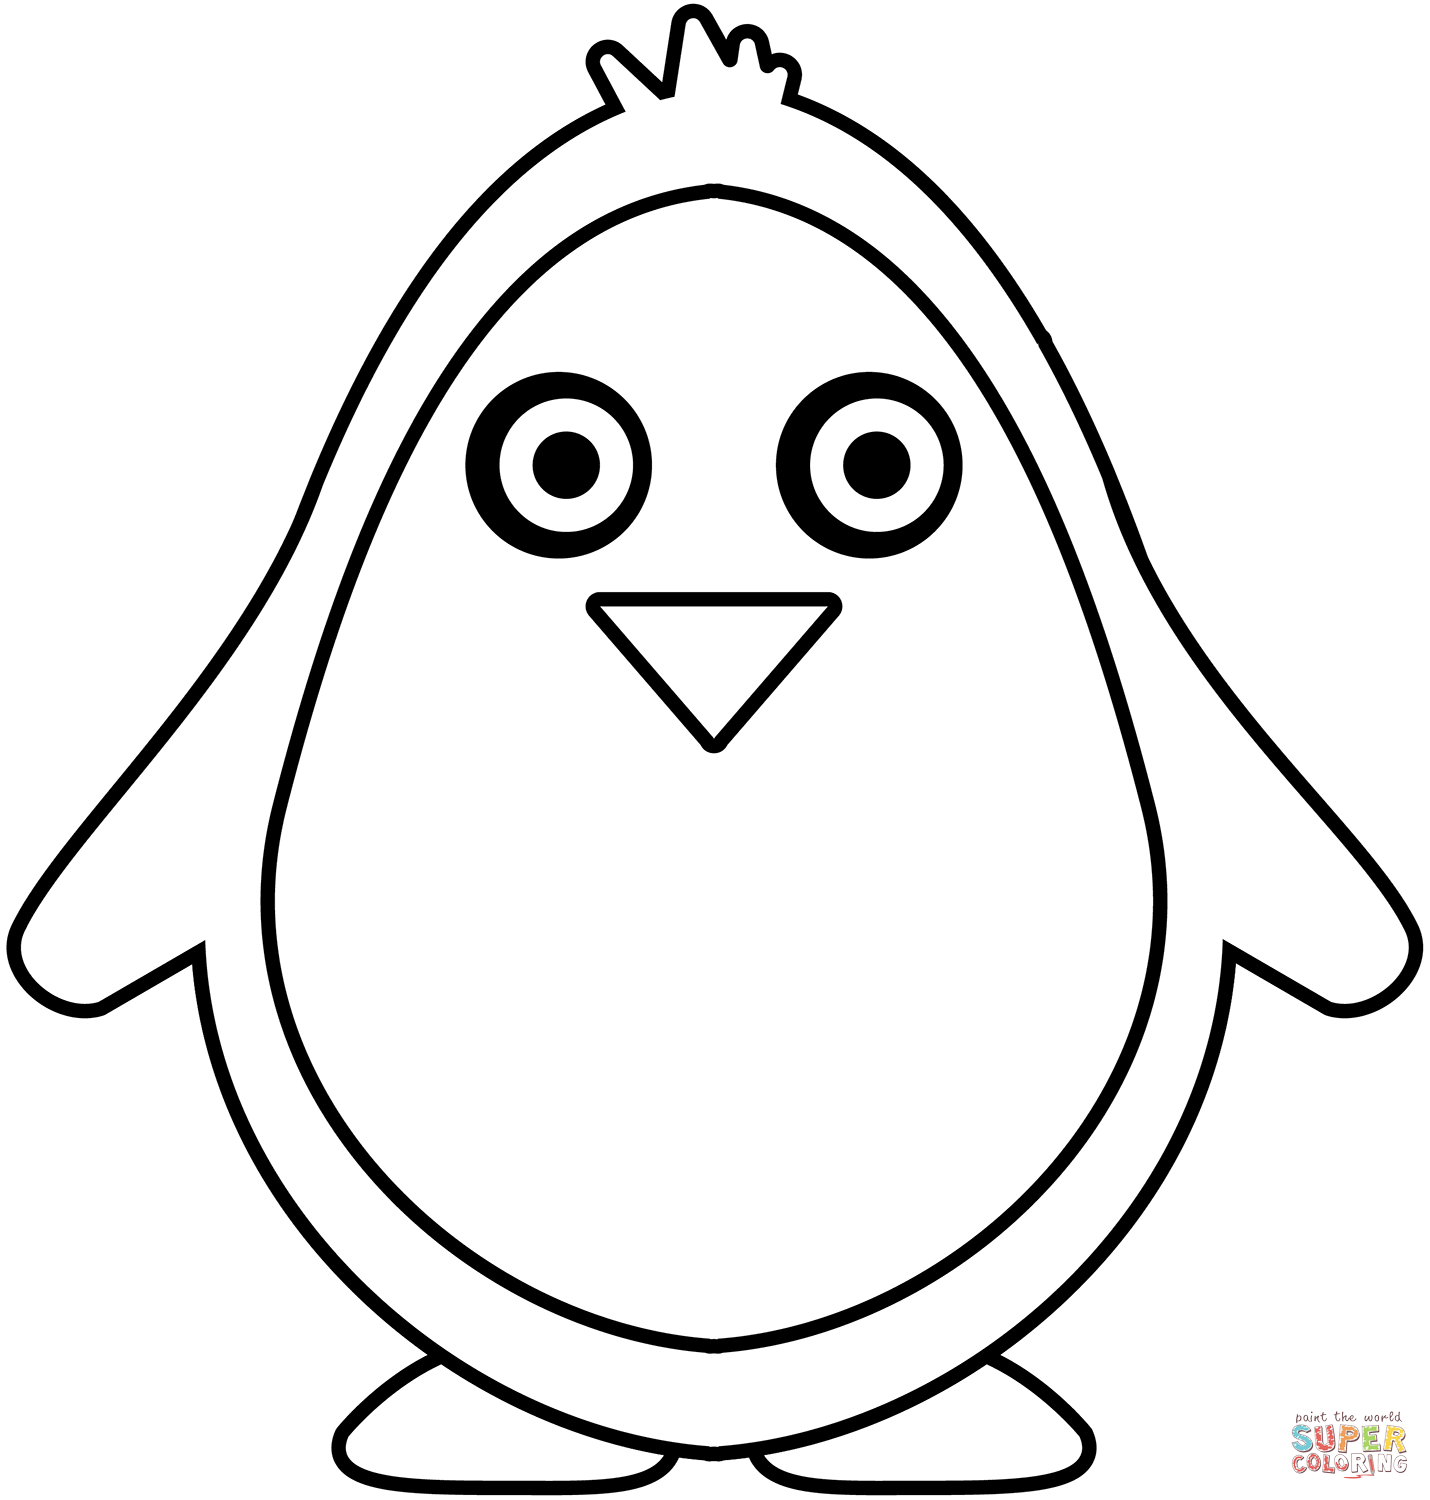 Cute penguin coloring page free printable coloring pages